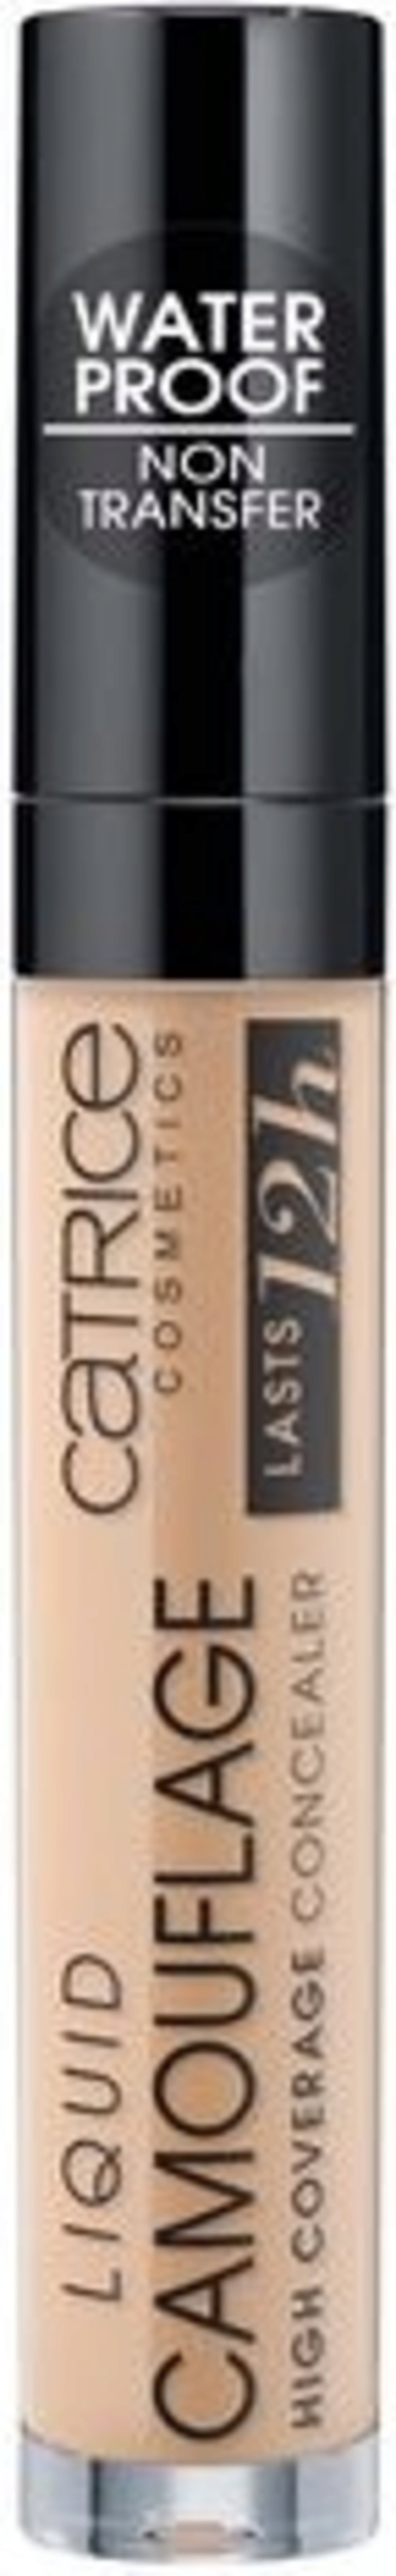 Catrice Cosmetics Liquid Camouflage High Coverage Concealer, 020 Light  Beige, 0.16 fl oz/5 mL Ingredients and Reviews